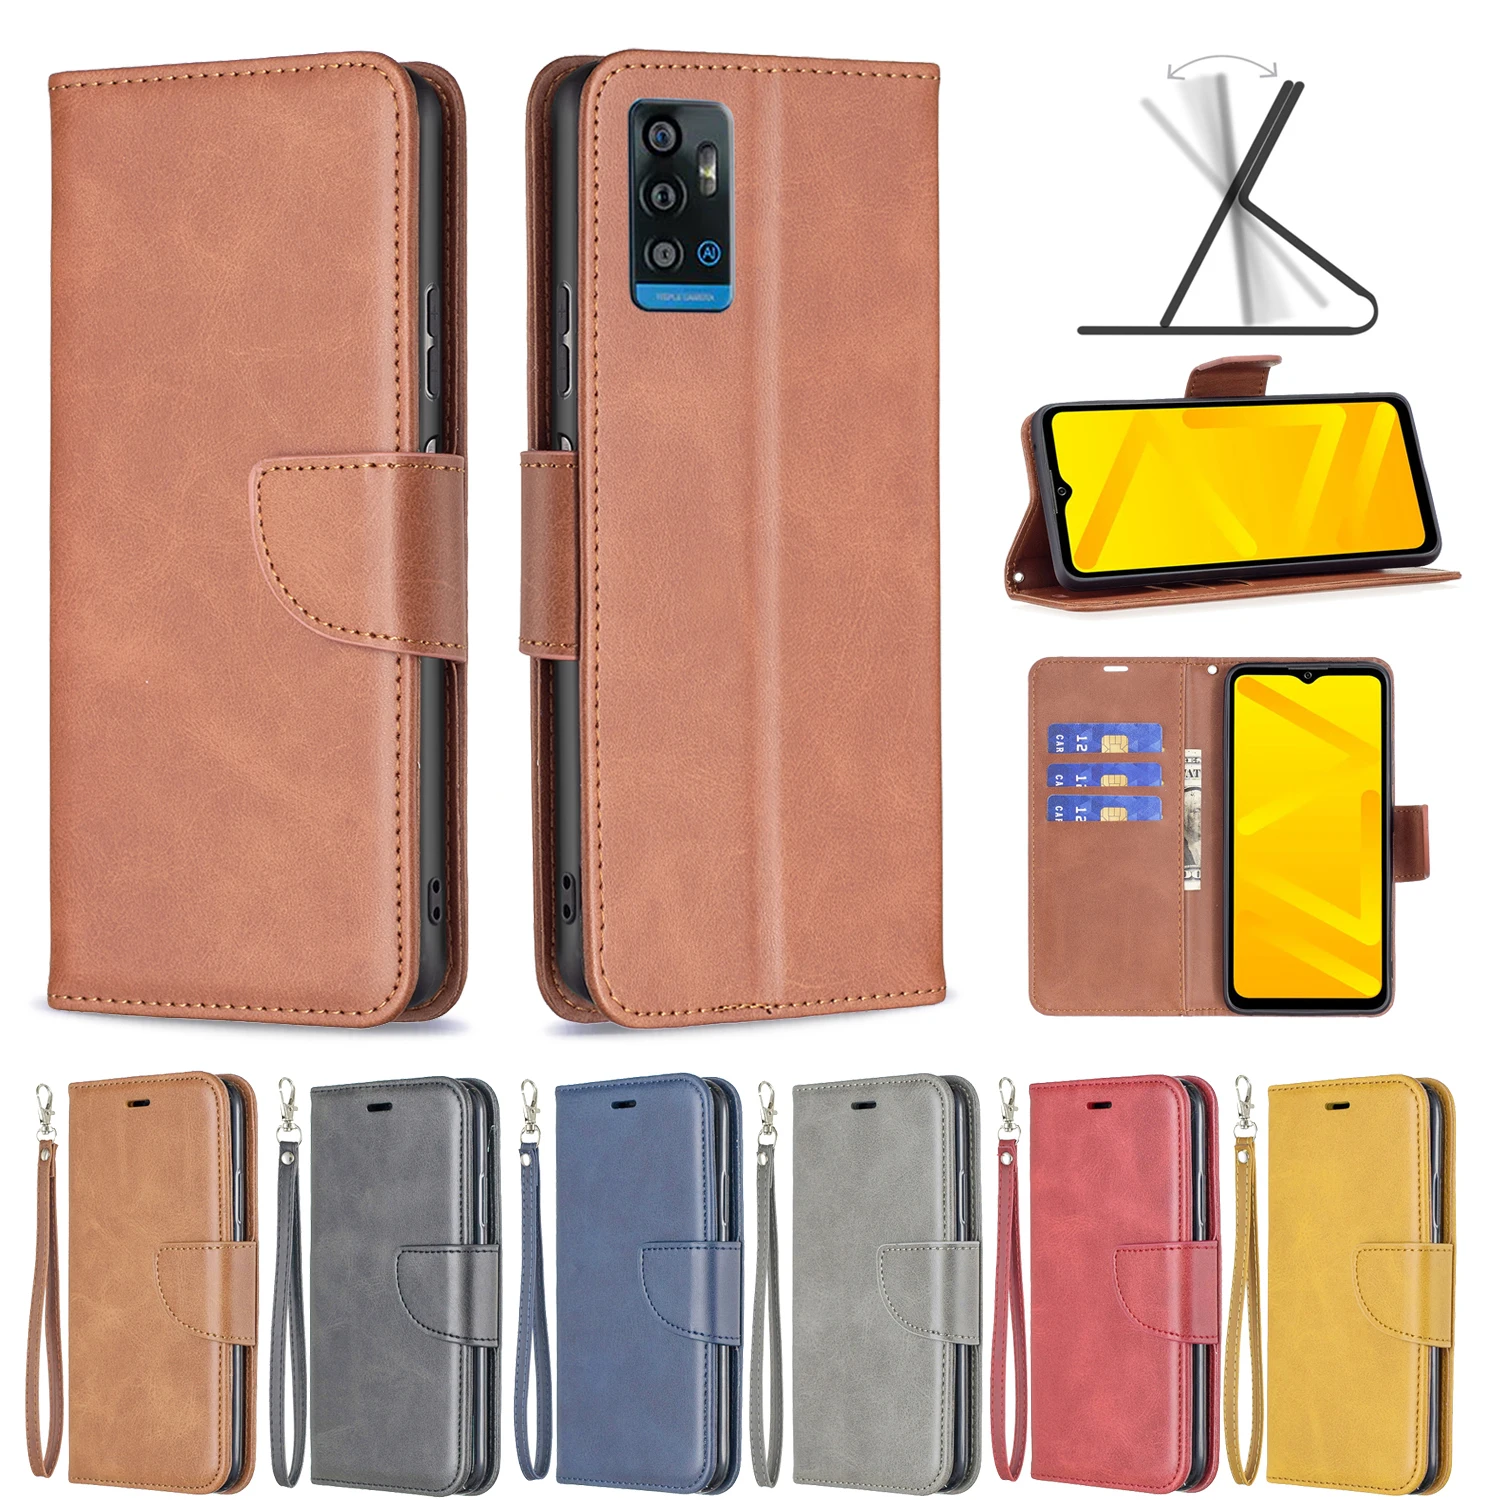 

Full Protect Case For ZTE Blade A52 A31 A51 A71 Phone Bags Luxury Flip Leather Wallet Card Holder Shockproof Kickstand Cover